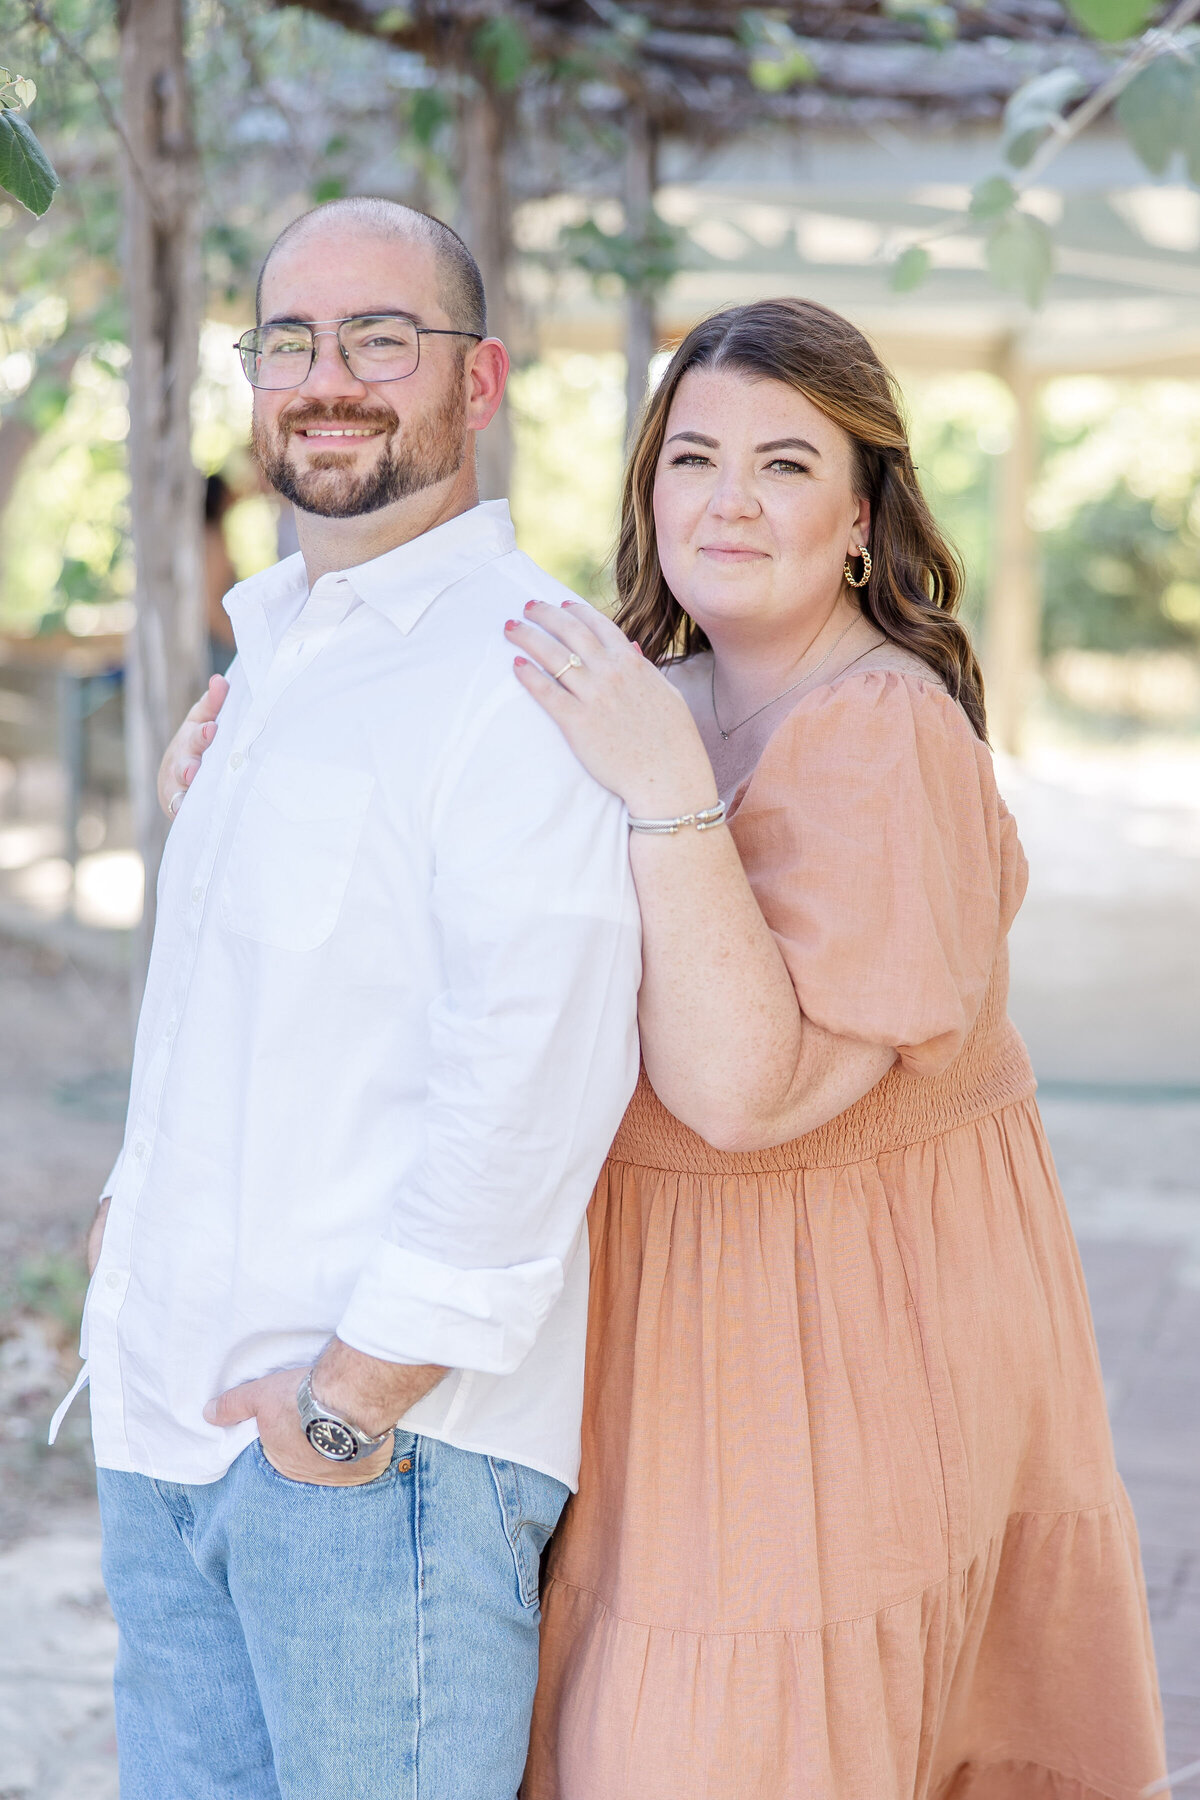 Boerne Texas wedding engagement session with peach dress by Firefly Photography